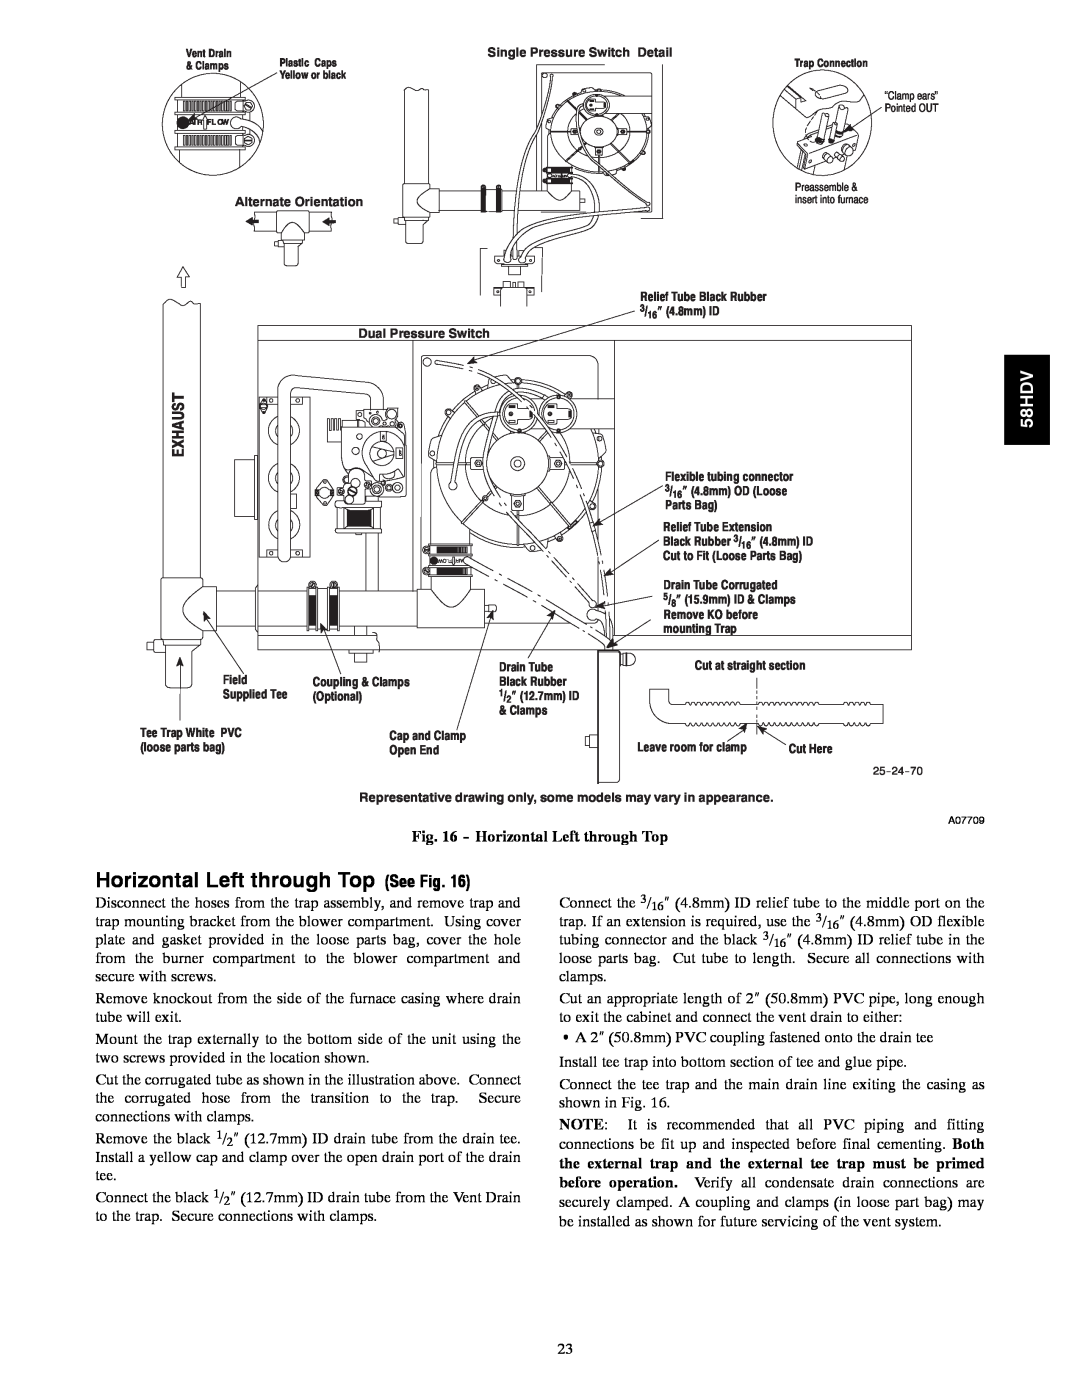 Carrier 58HDV installation instructions Horizontal Left through Top See Fig 